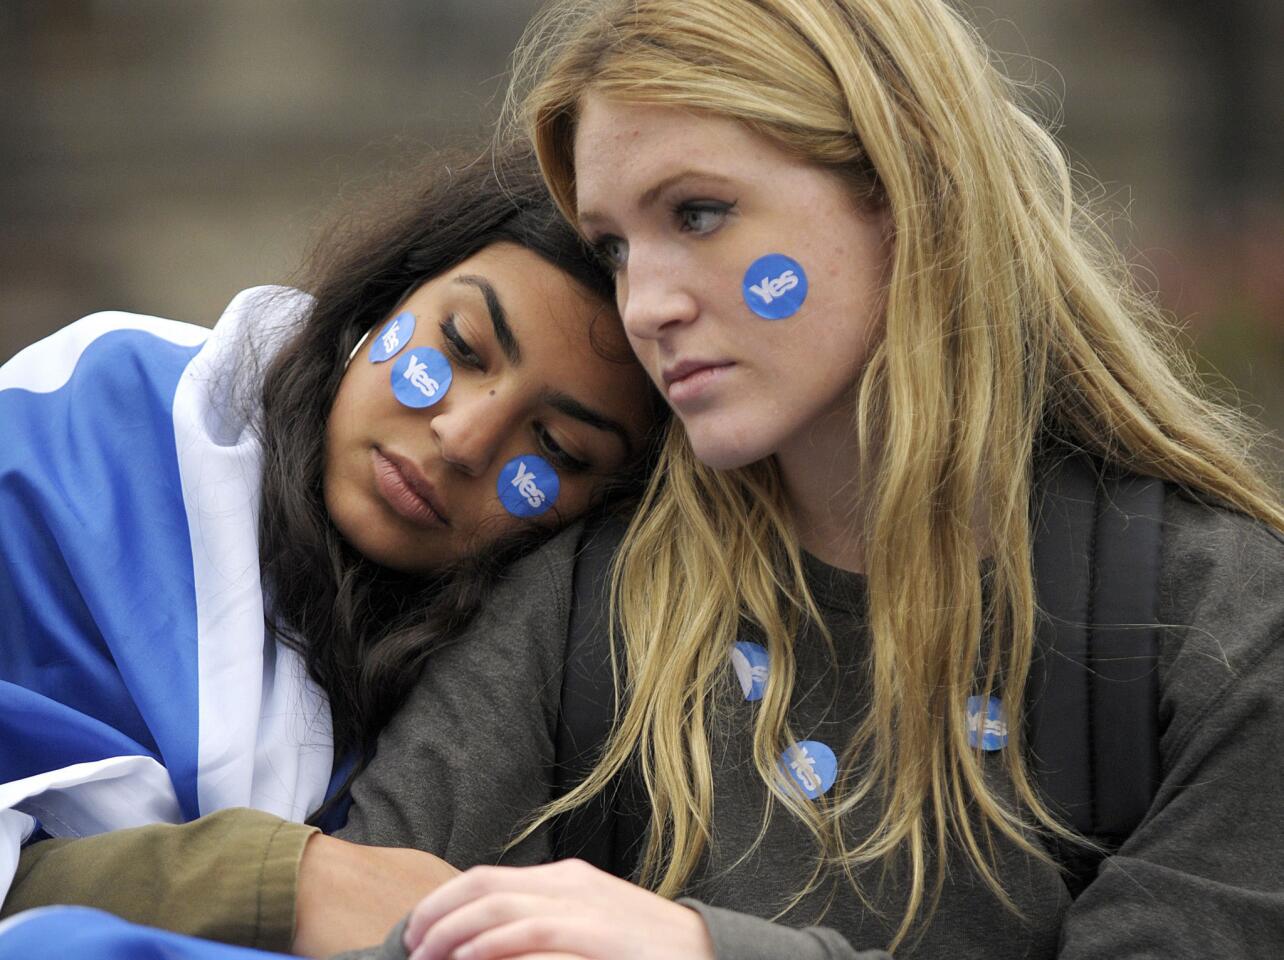 Pro-independence supporters console each other in Glasgow, Scotland, following a defeat in the referendum on Scottish independence.